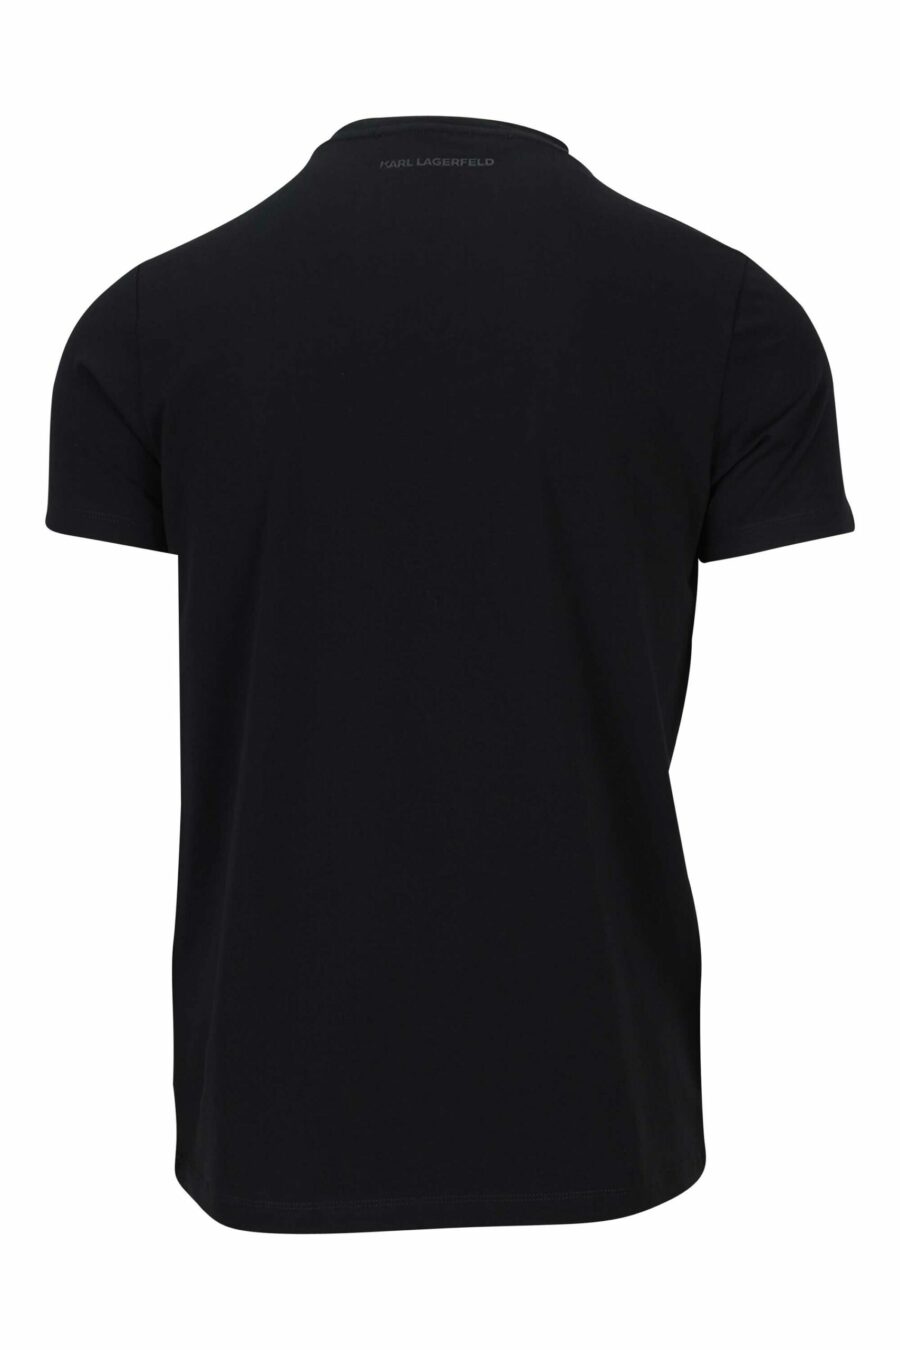 Black T-shirt with white centred logo - 4062226676205 1 1 scaled